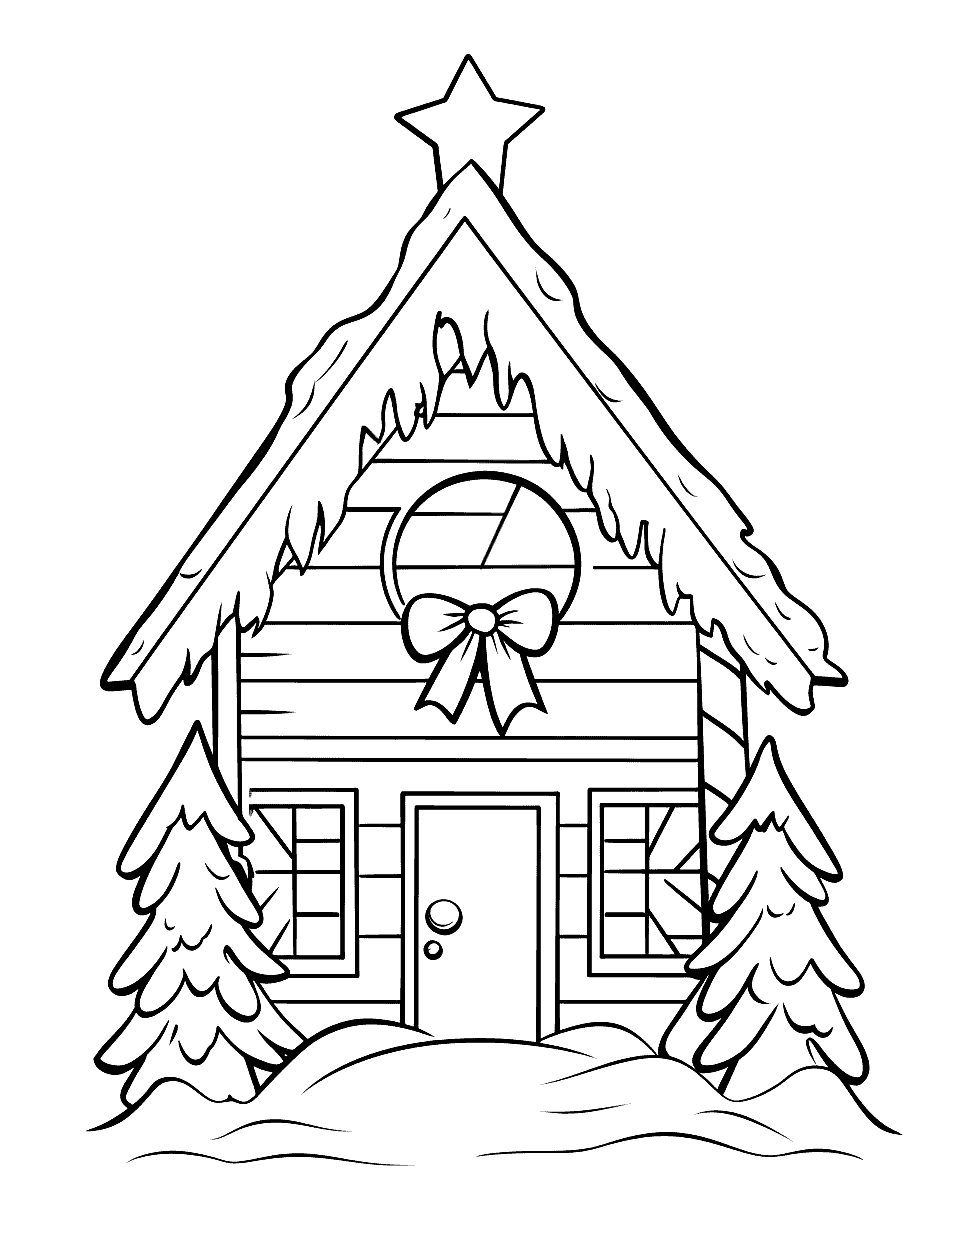 Lodge Christmas Coloring Page - A Christmas-decorated lodge covered in snow.